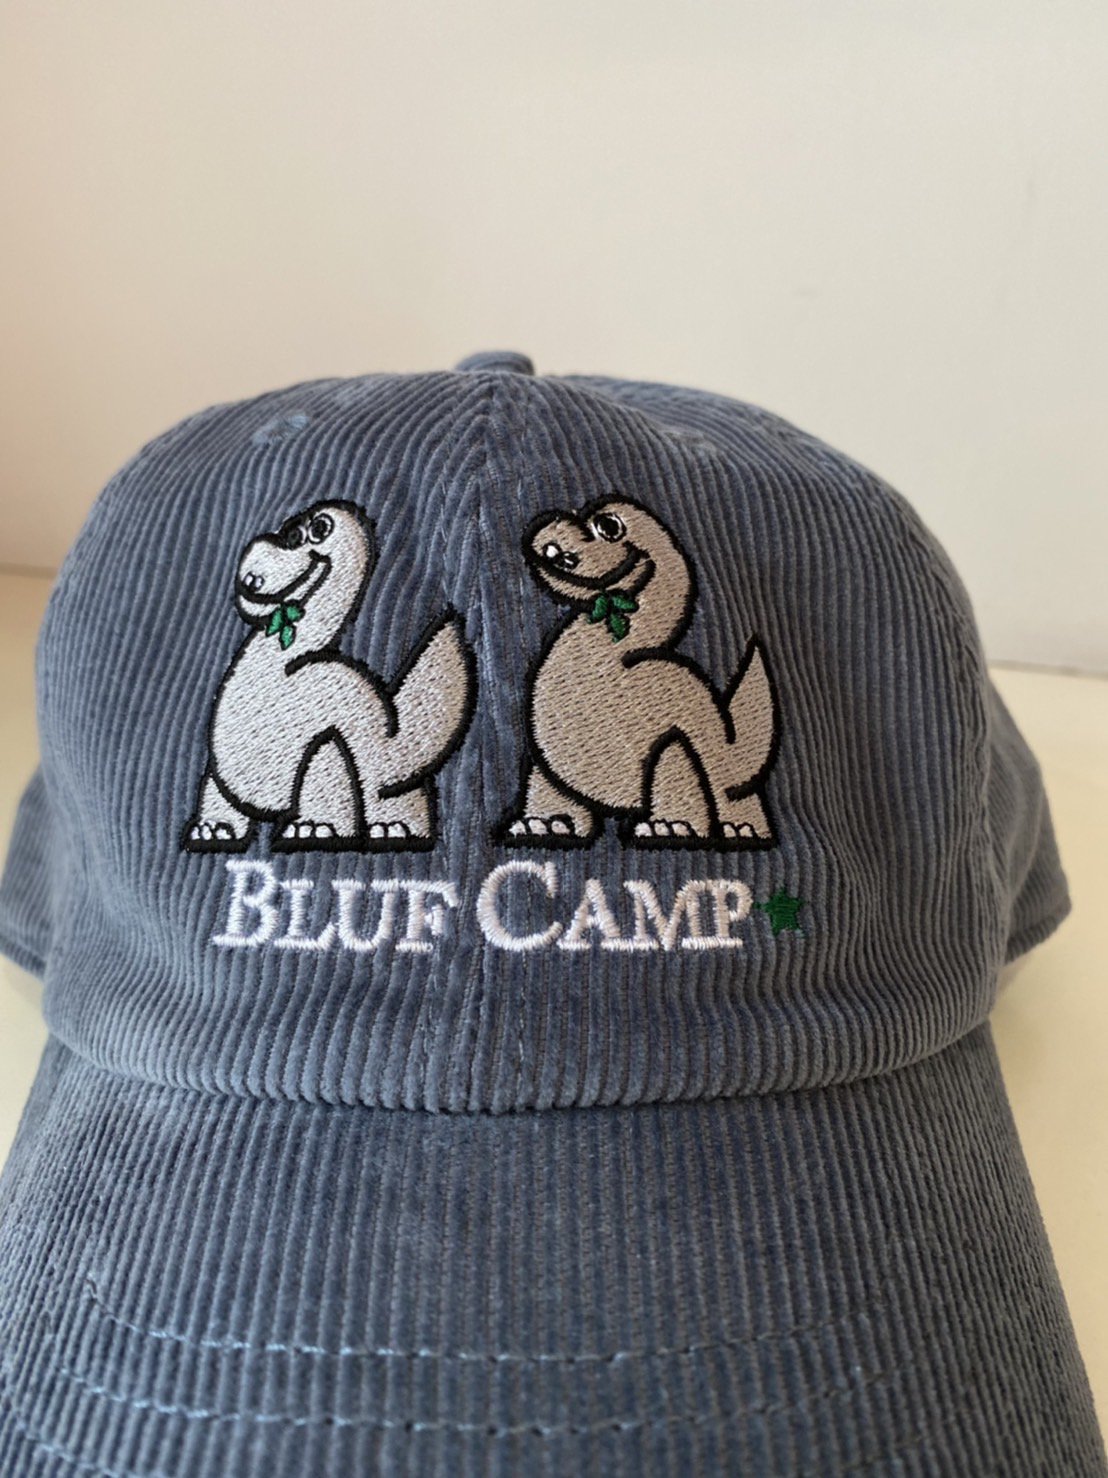 BLUFCAMP<br />Embroidered Corduroy CAP / Smoke Blue<img class='new_mark_img2' src='https://img.shop-pro.jp/img/new/icons14.gif' style='border:none;display:inline;margin:0px;padding:0px;width:auto;' />